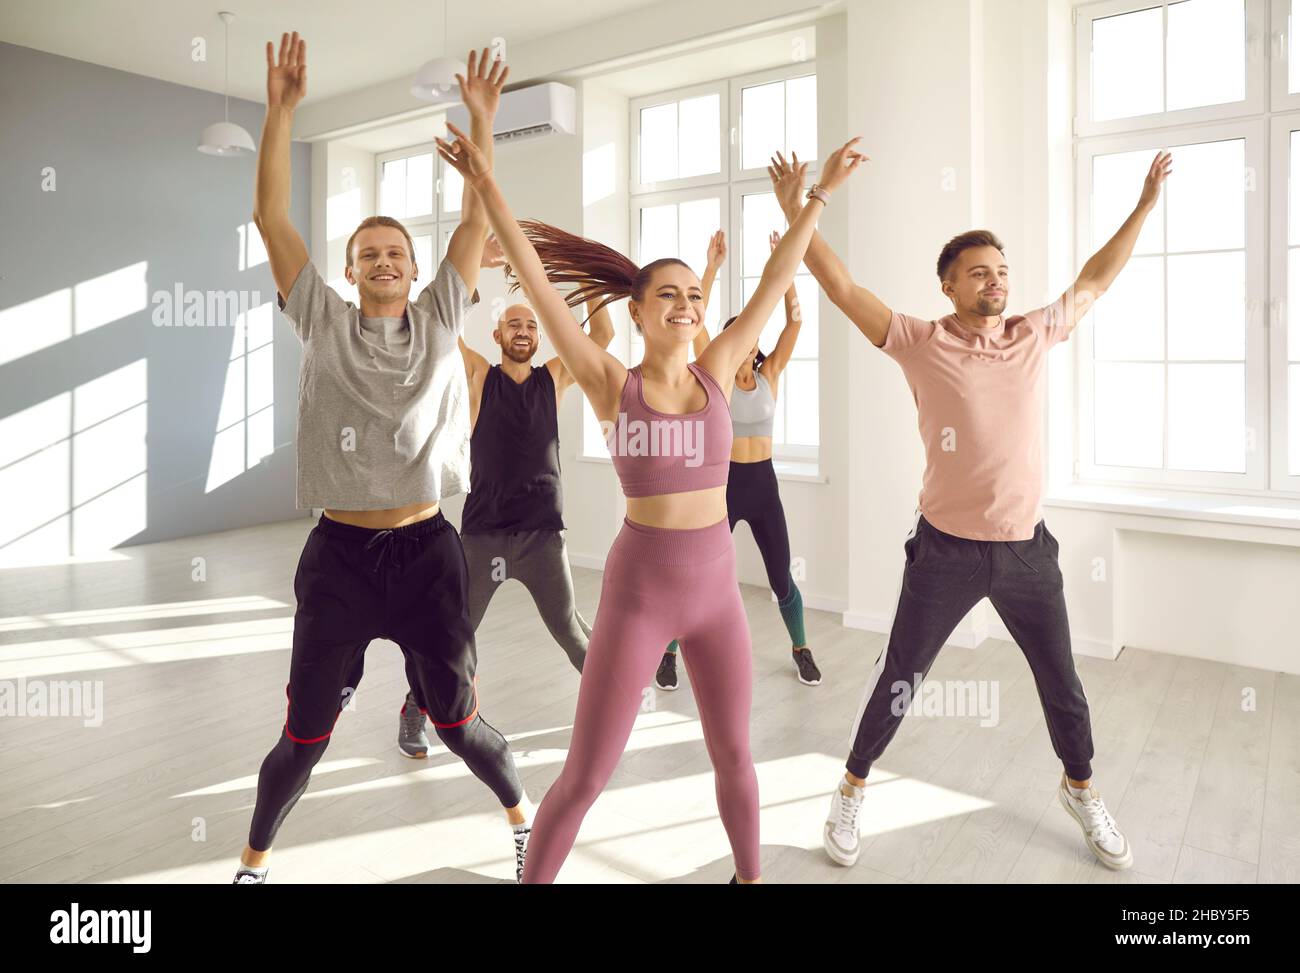 Group of happy young people doing jumping jacks during a cardio workout at the gym Stock Photo